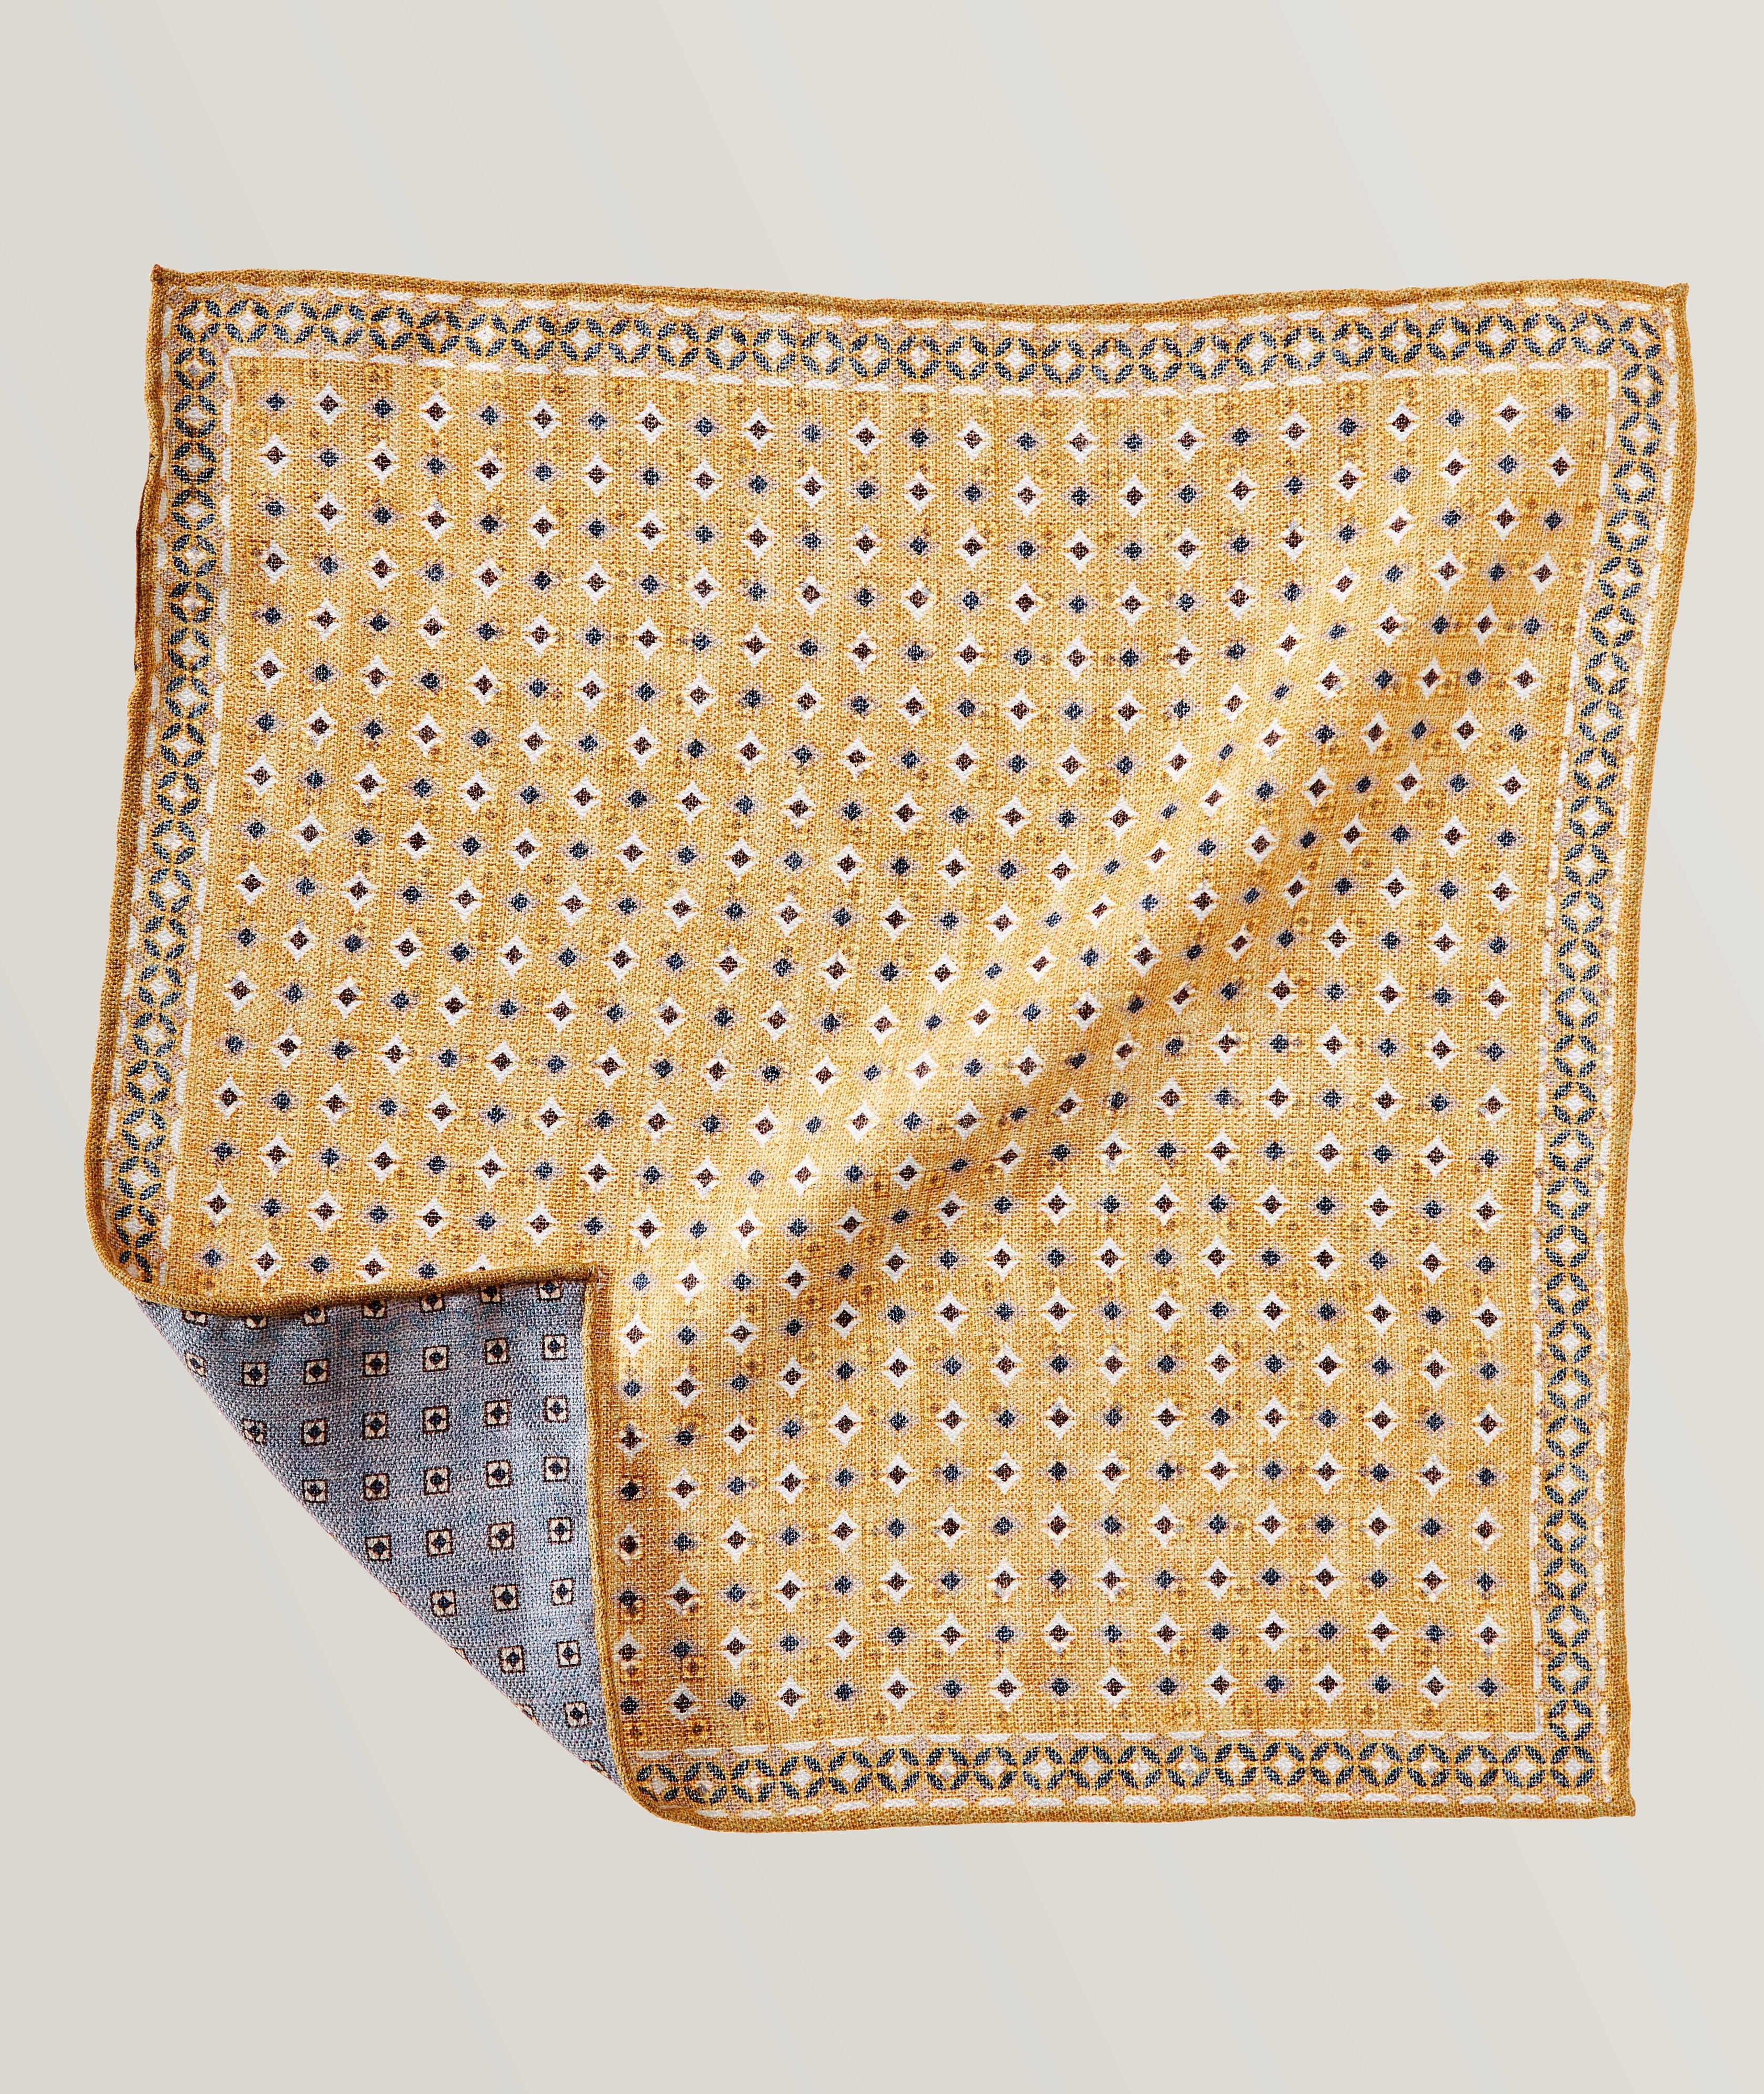 Neat Patterned Silk Pocket Square image 0